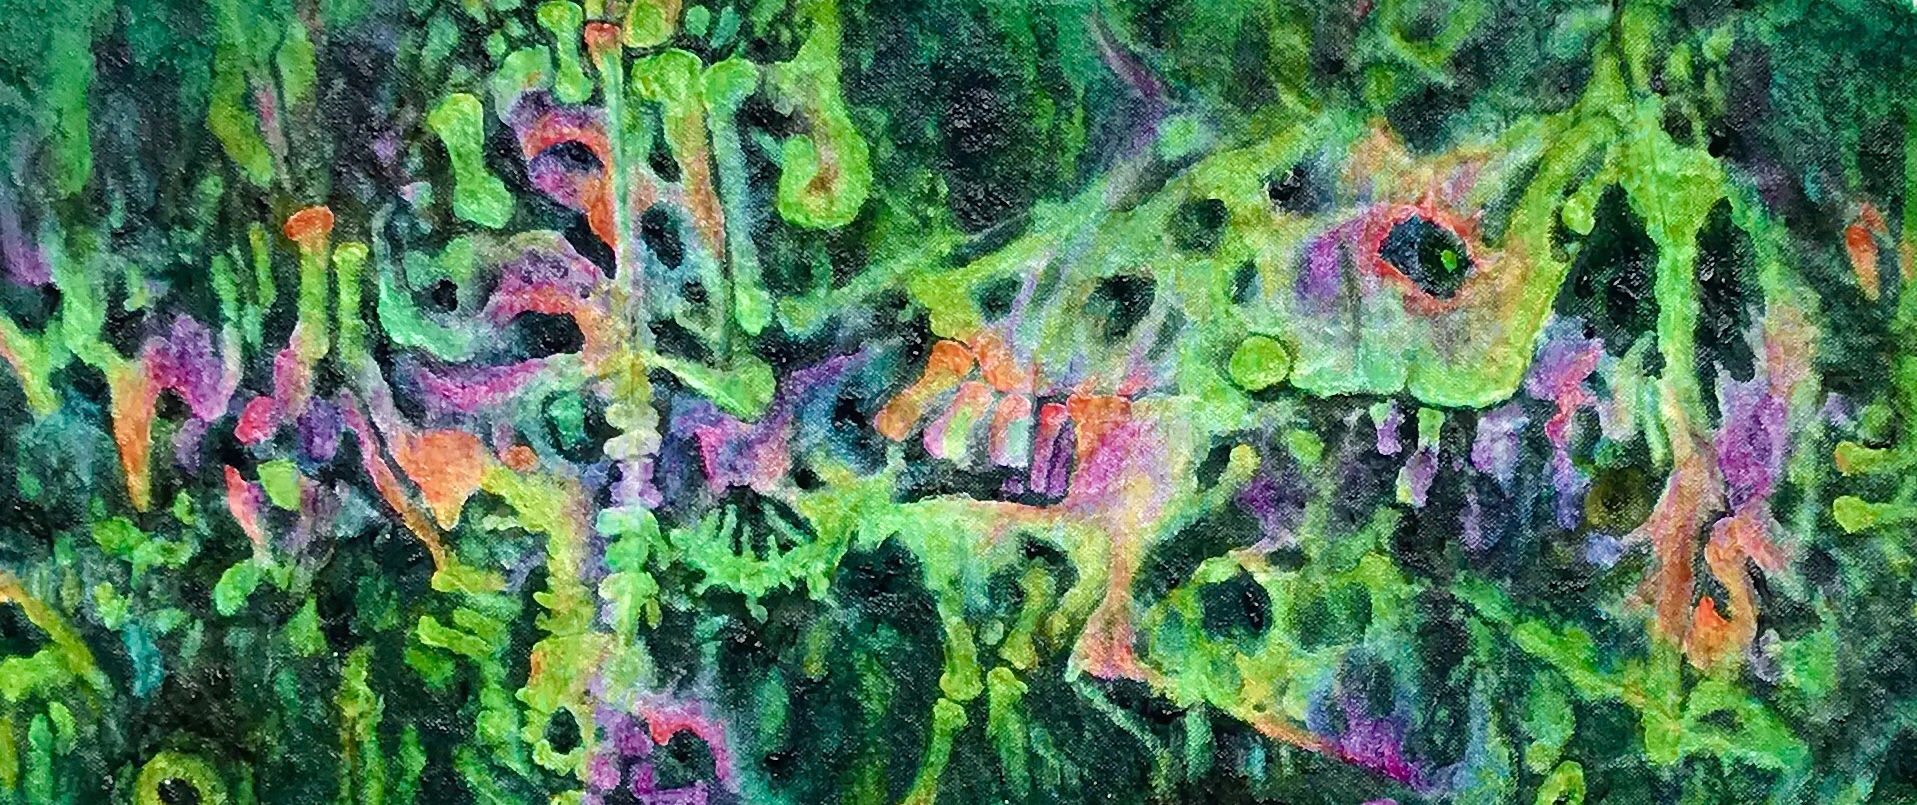 Detail of an abstract painting by MJ Seal that resembles a rainbow hued fossil bone bed within a giant green paramecium